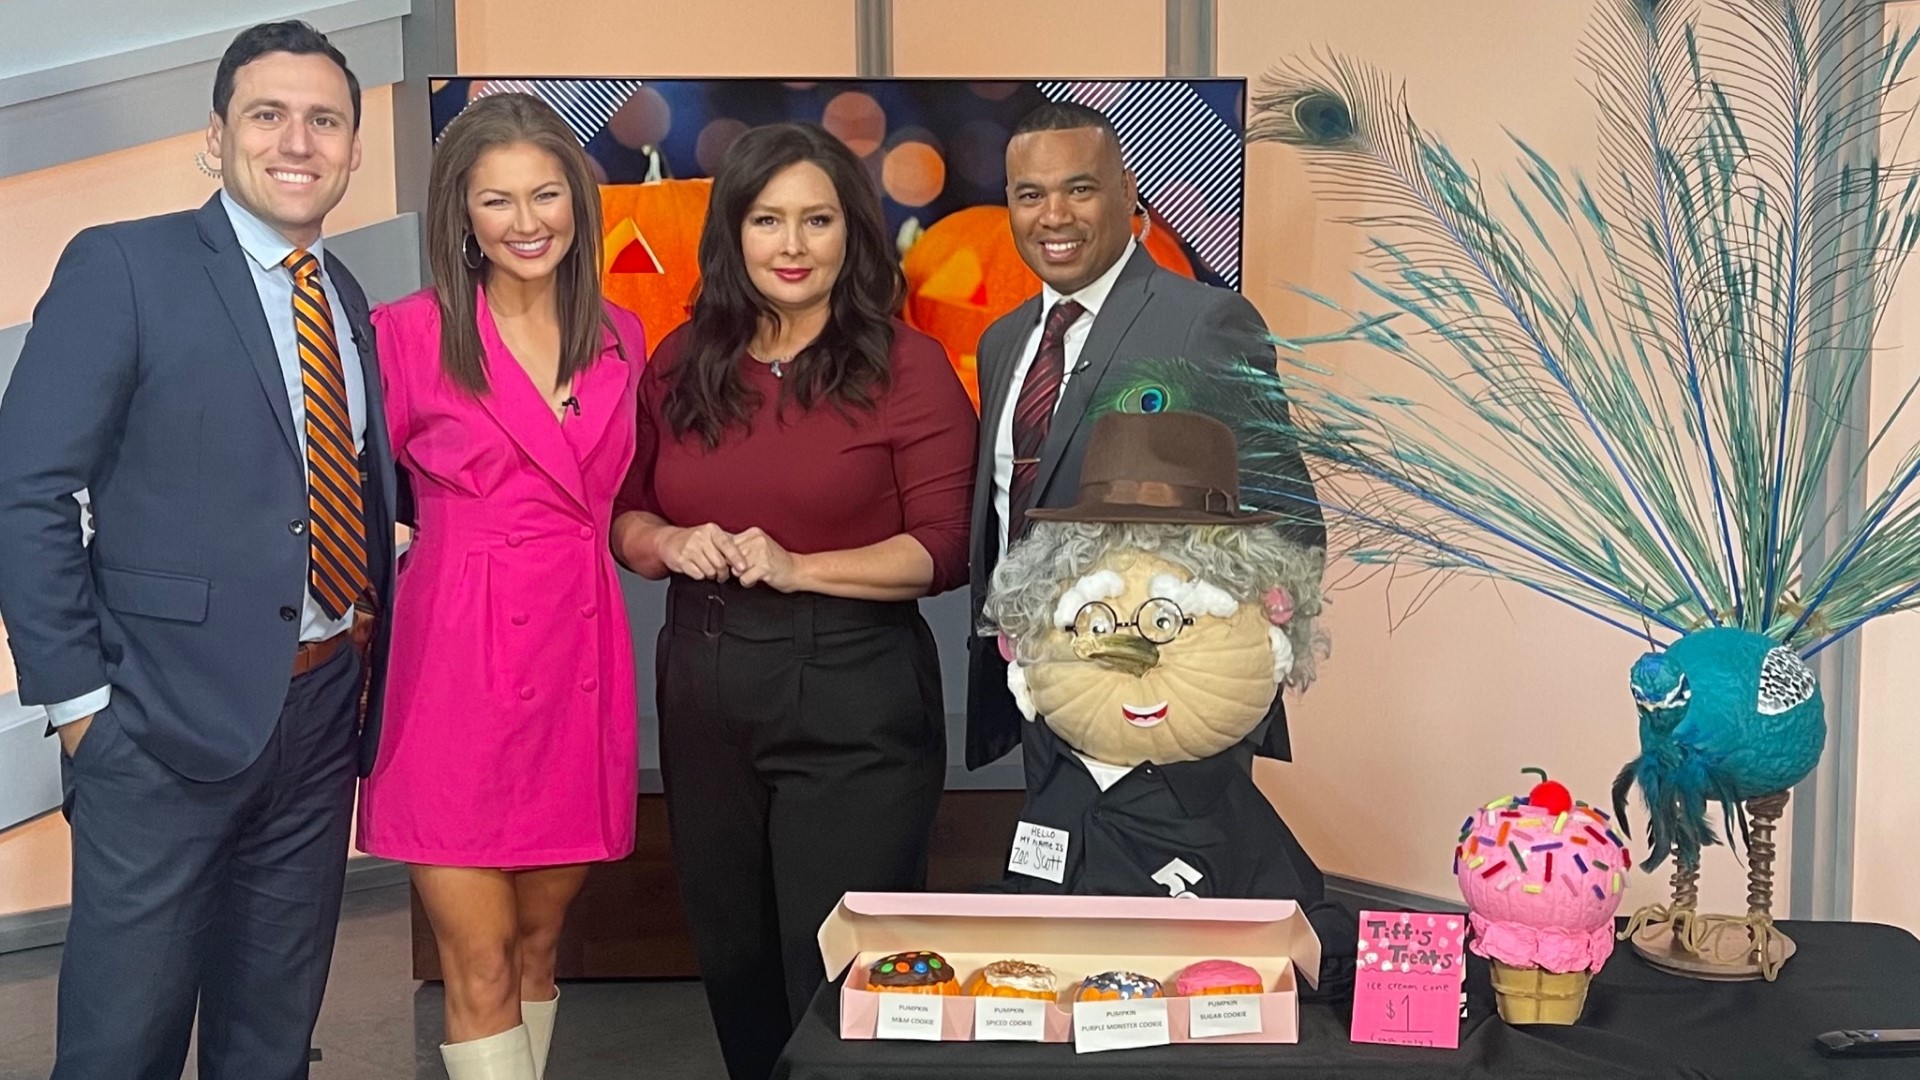 5NEWS This Morning team reveals their pumpkins for the 2022 pumpkin carving contest.